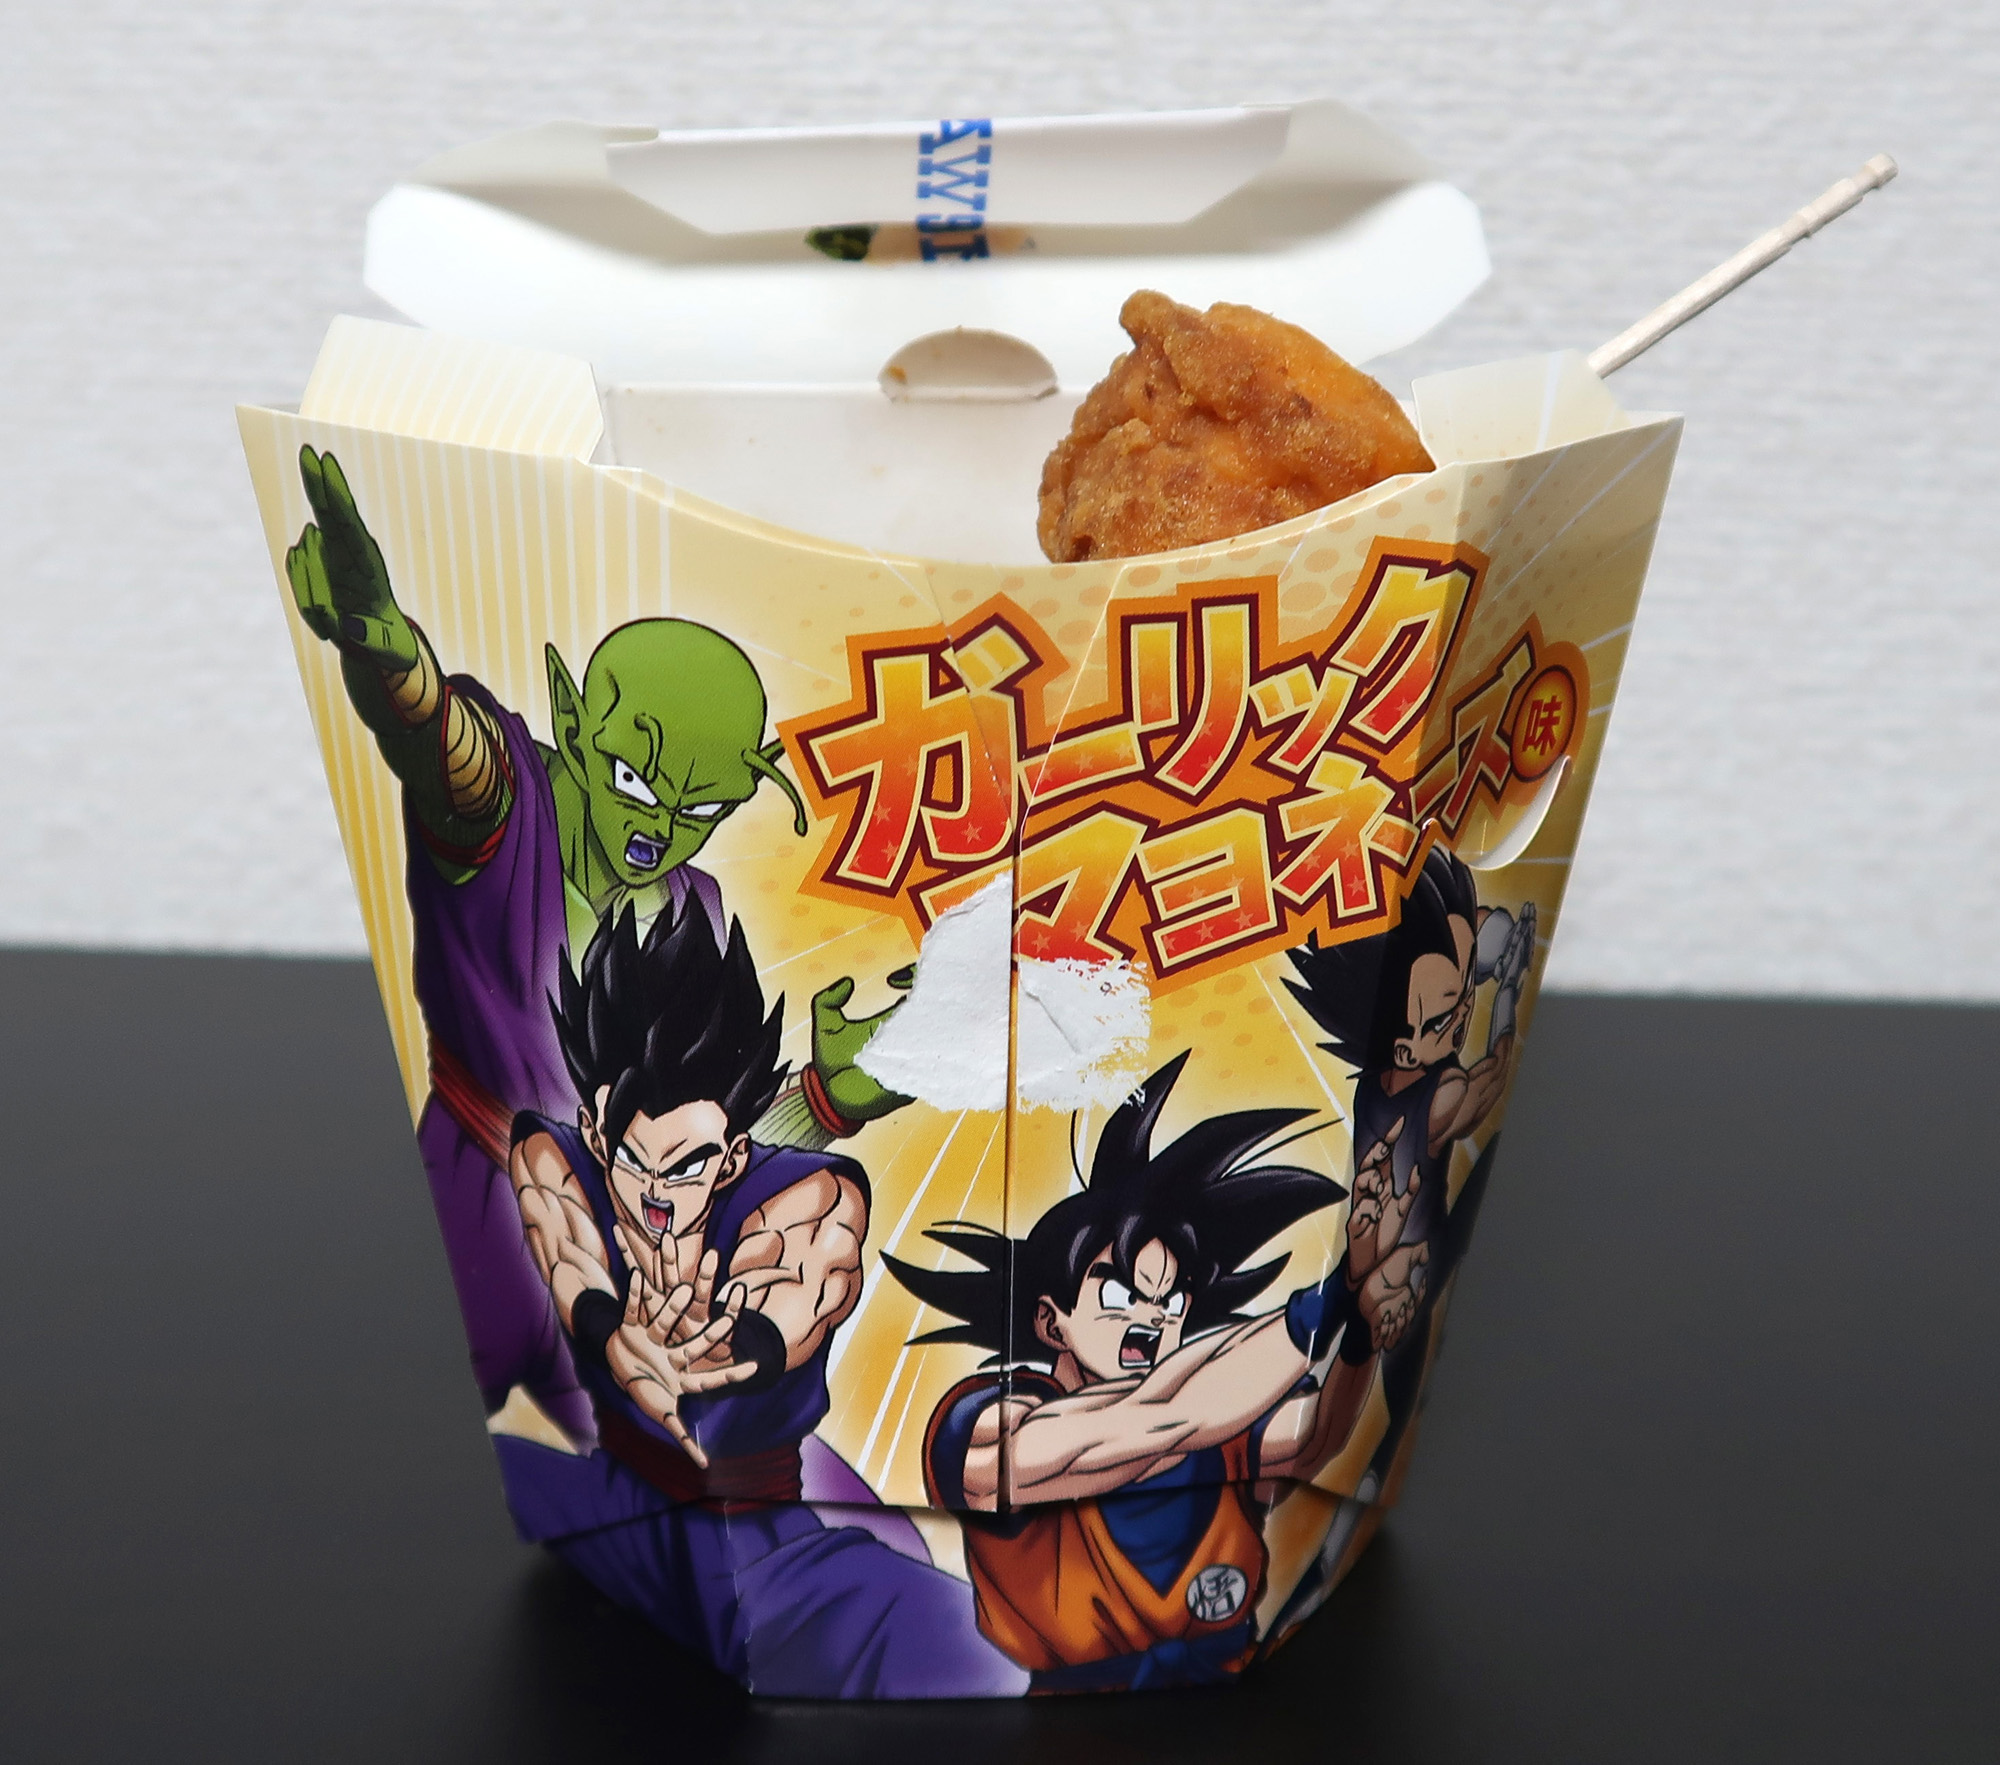 Dragon Ball Super: SUPER HERO Teams Up with Oreo for a Delectable